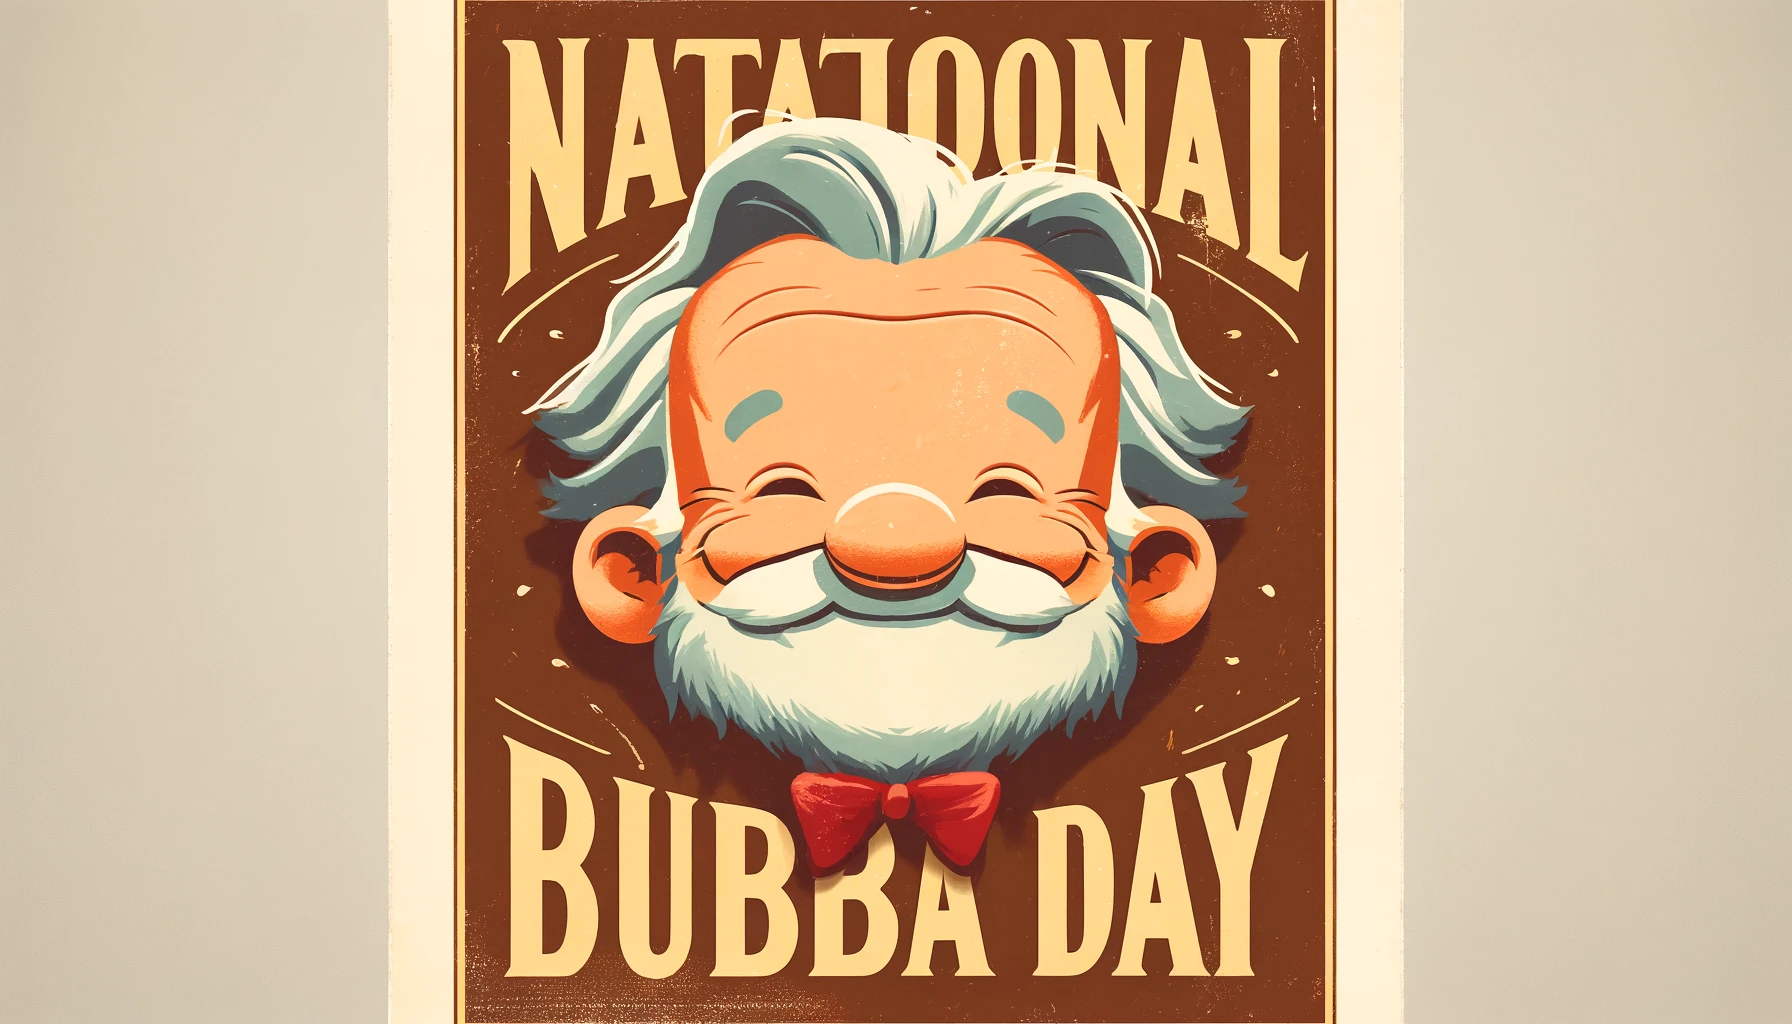 National Bubba Day